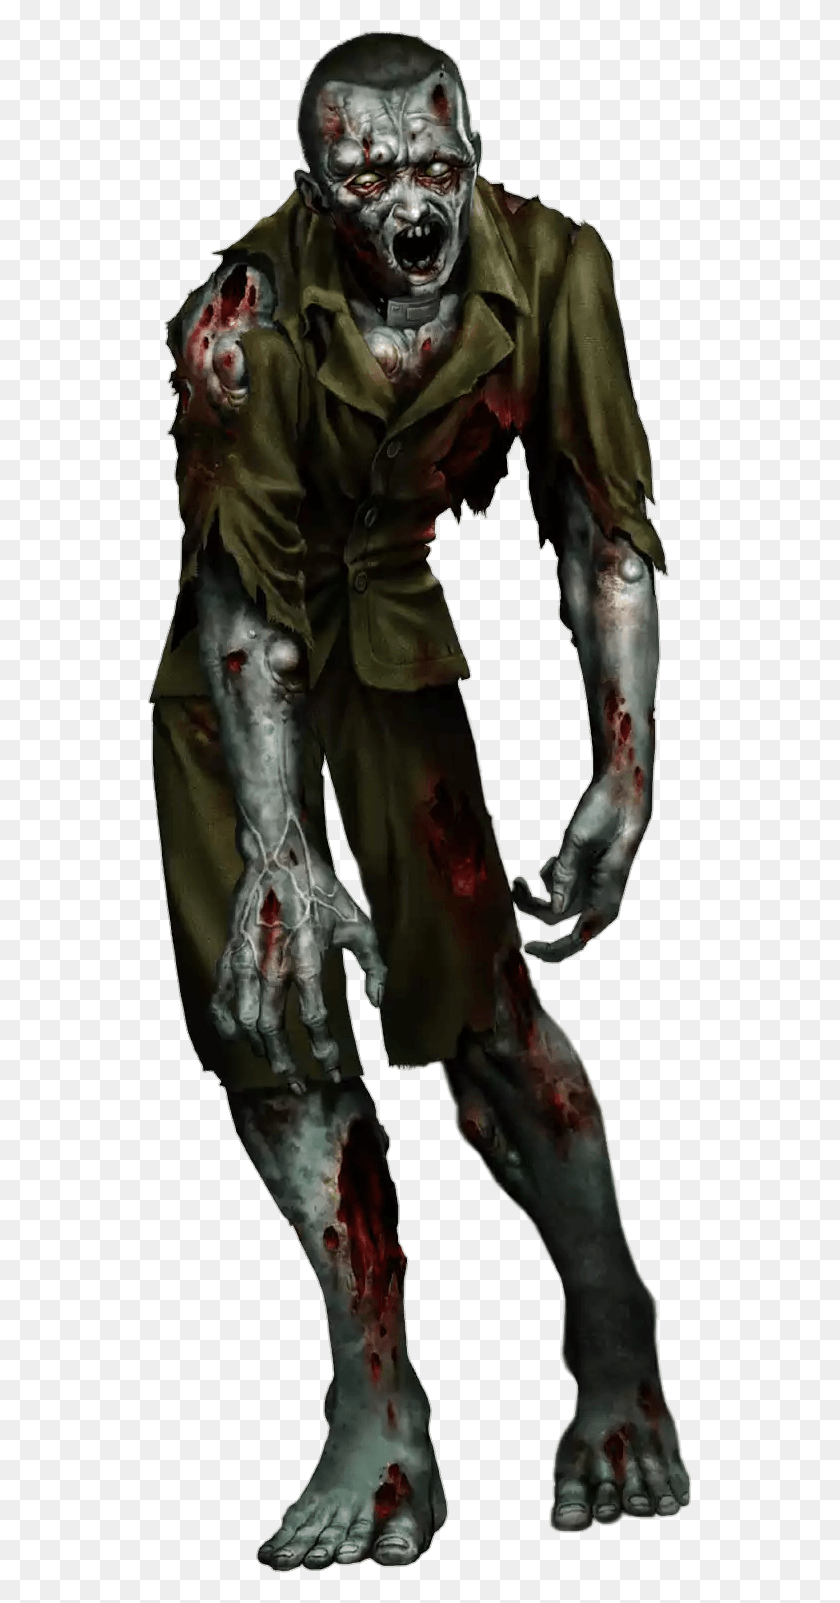 545x1543 Descargar Png Zombie Resident Evil Code Veronica, Persona, Humano, Mano Hd Png